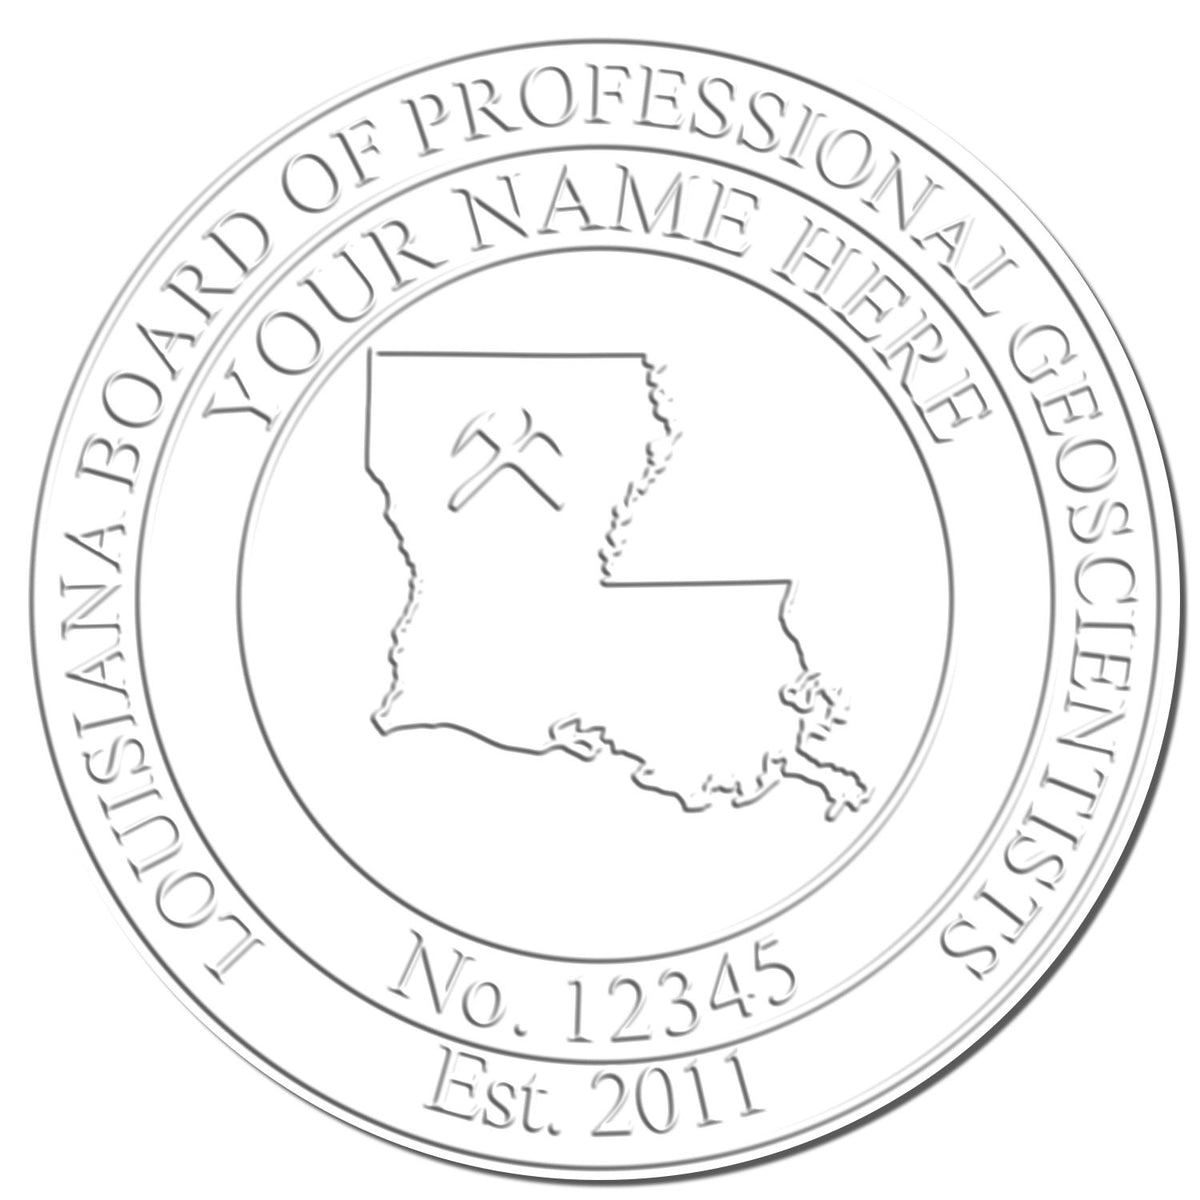 A photograph of the Hybrid Louisiana Geologist Seal stamp impression reveals a vivid, professional image of the on paper.